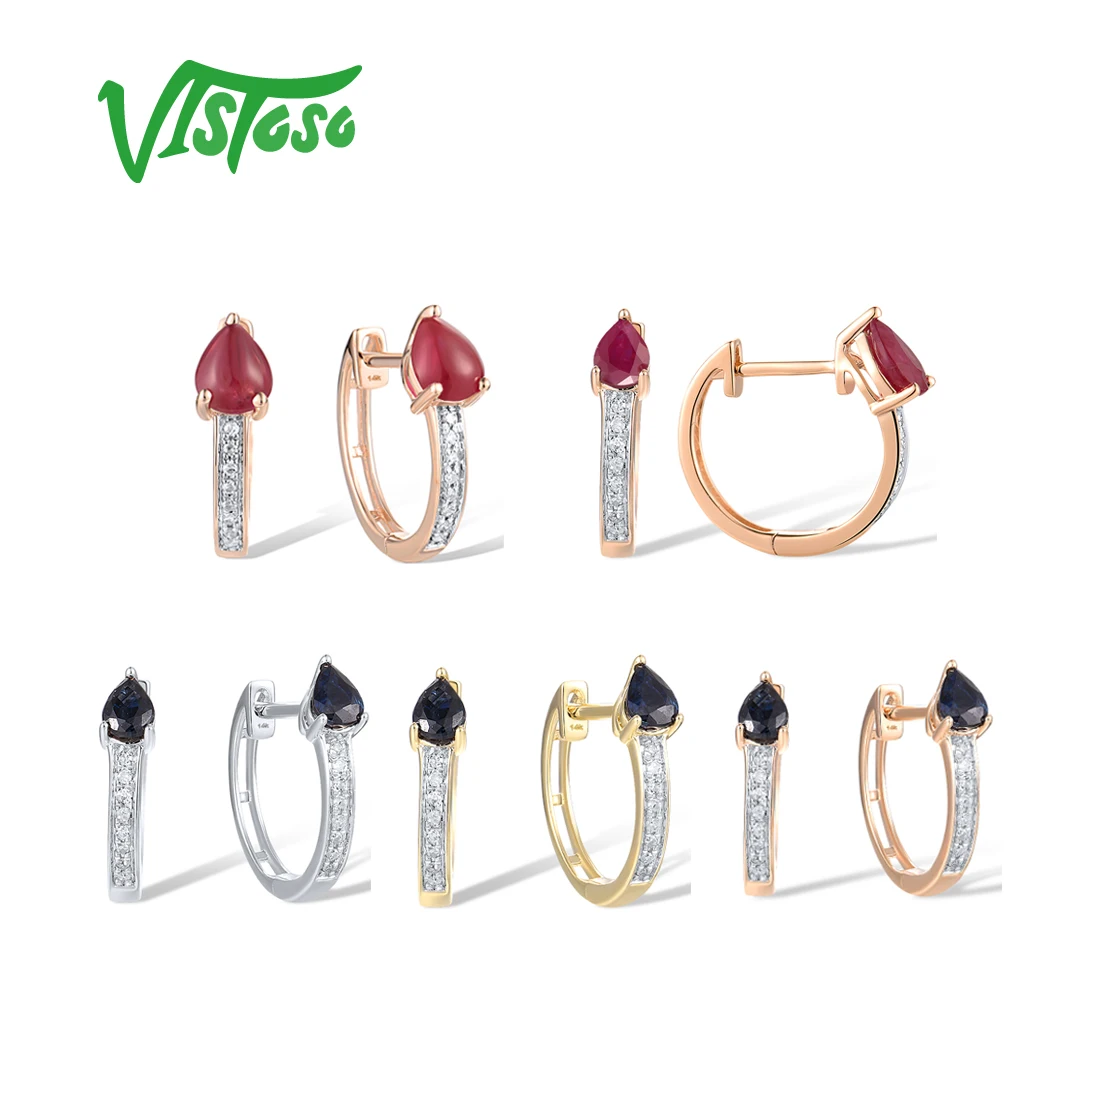 

VISTOSO Pure 14K 585 Rose White Yellow Gold Earrings For Women Sparkling Diamond Blue Sapphire Ruby Hoop Delicate Fine Jewelry